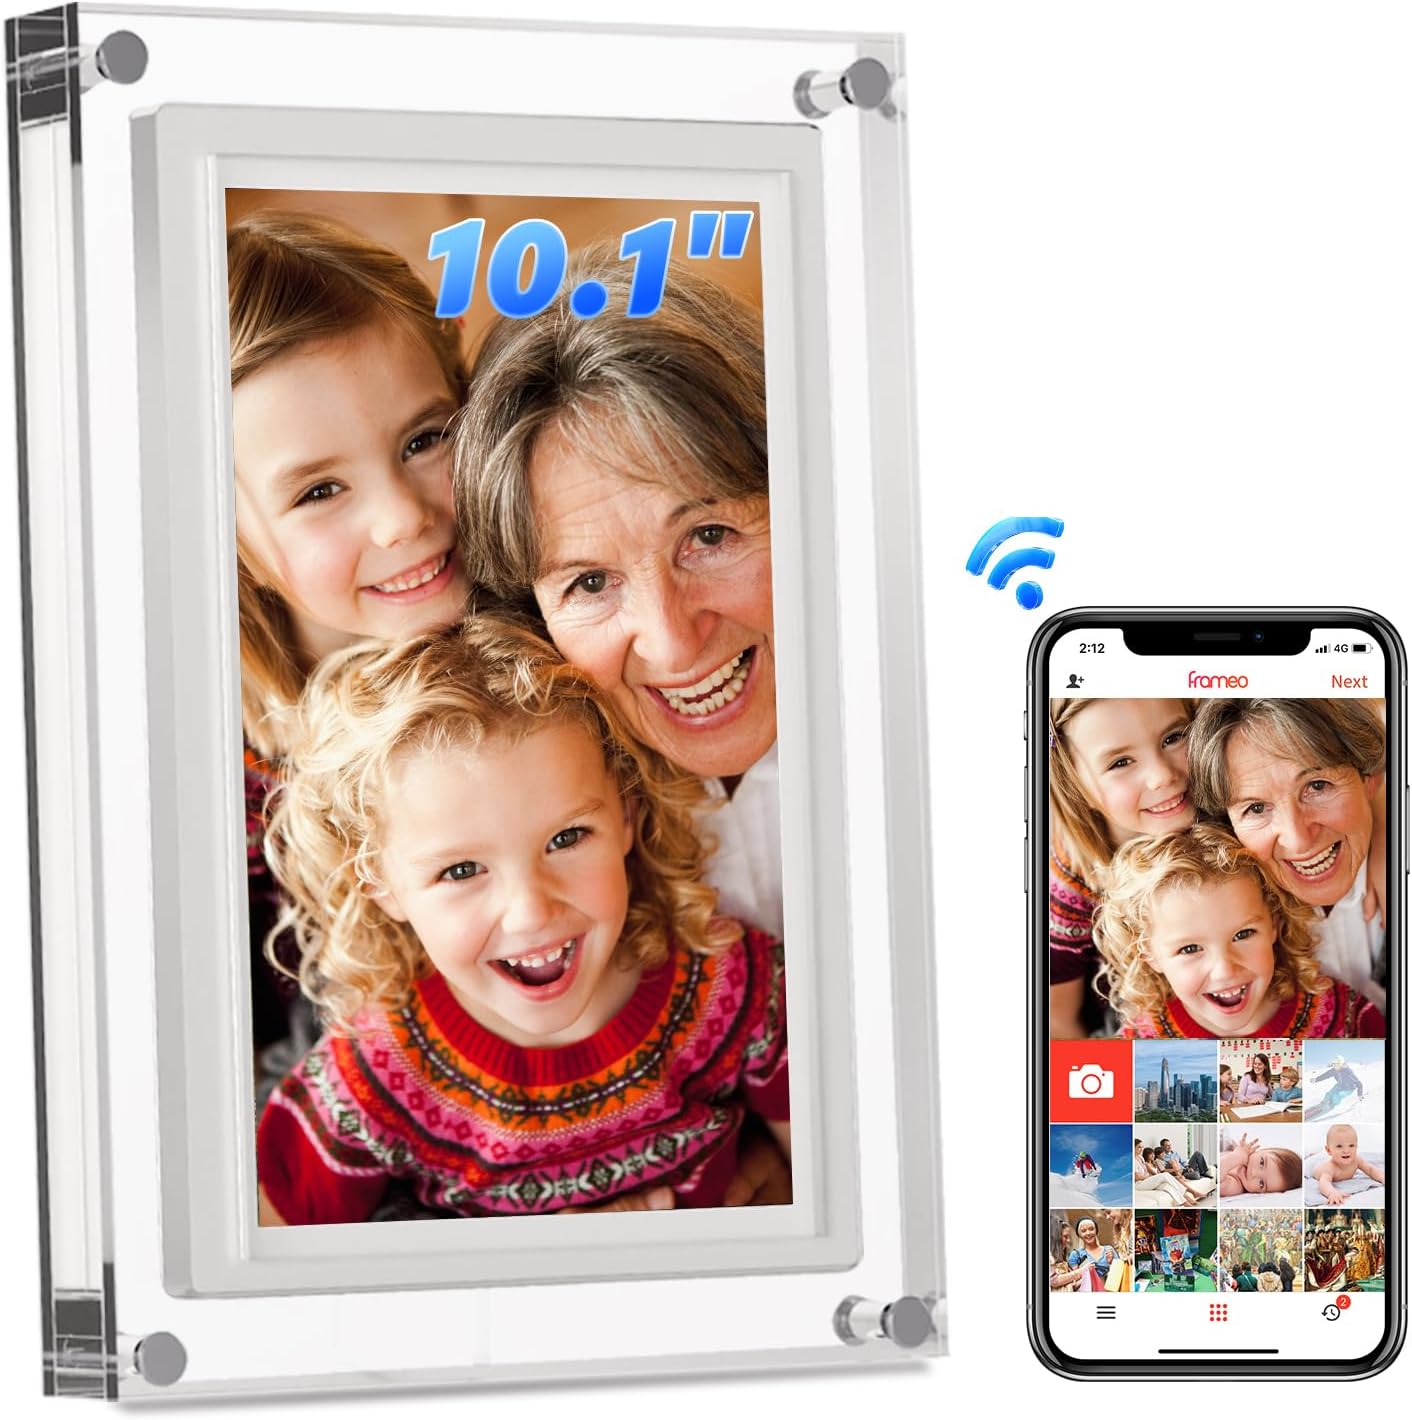 Amaboo 10.1 Inch WiFi Smart Cloud Digital Picture Frame, Electronic Photo Frame with IPS LCD Touch Screen HD Display, Auto Rotate, Share Photos or Videos via Frameo APP